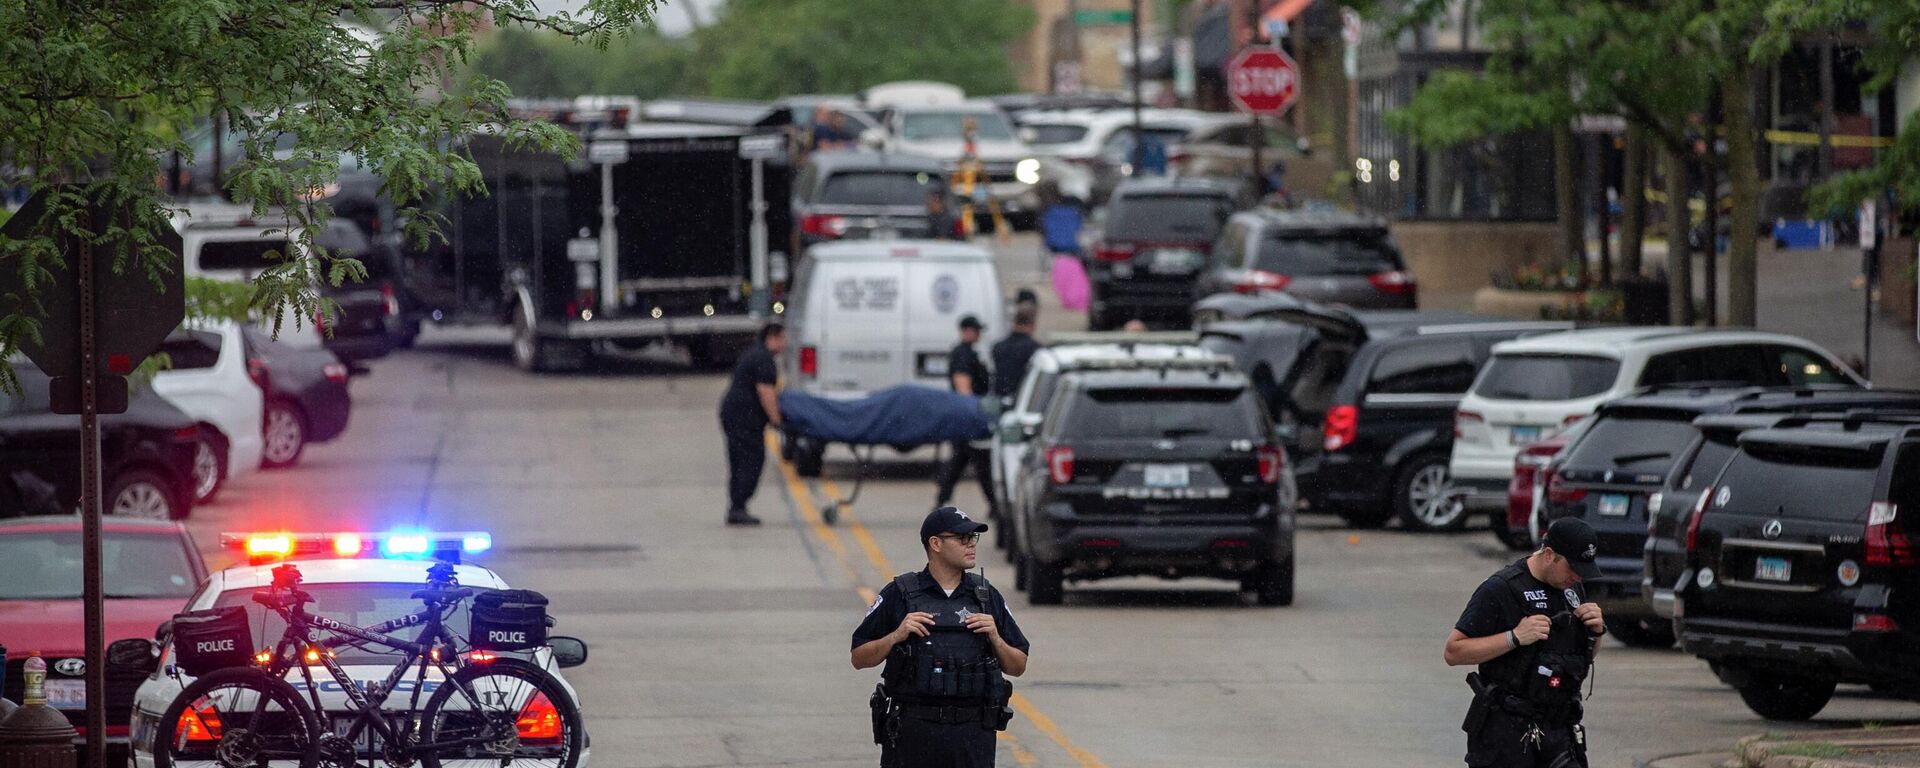 HIGHLAND PARK, IL - JULY 04: First responders take away victims from the scene of a mass shooting at a Fourth of July parade on July 4, 2022 in Highland Park, Illinois. At least six people were killed and 19 injured, according to published reports - Sputnik International, 1920, 05.07.2022